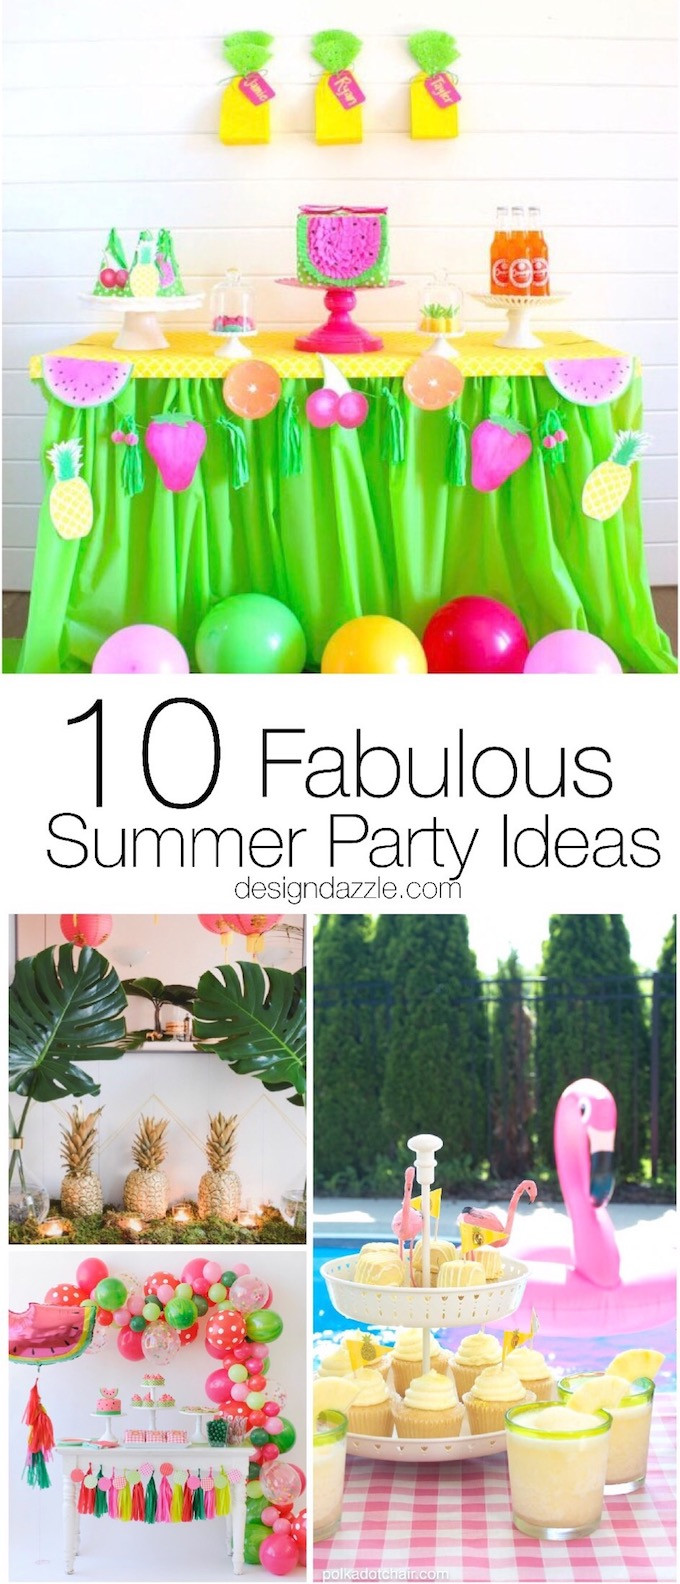 Ideas For A Summer Party
 10 Fabulous Summer Party Ideas Design Dazzle